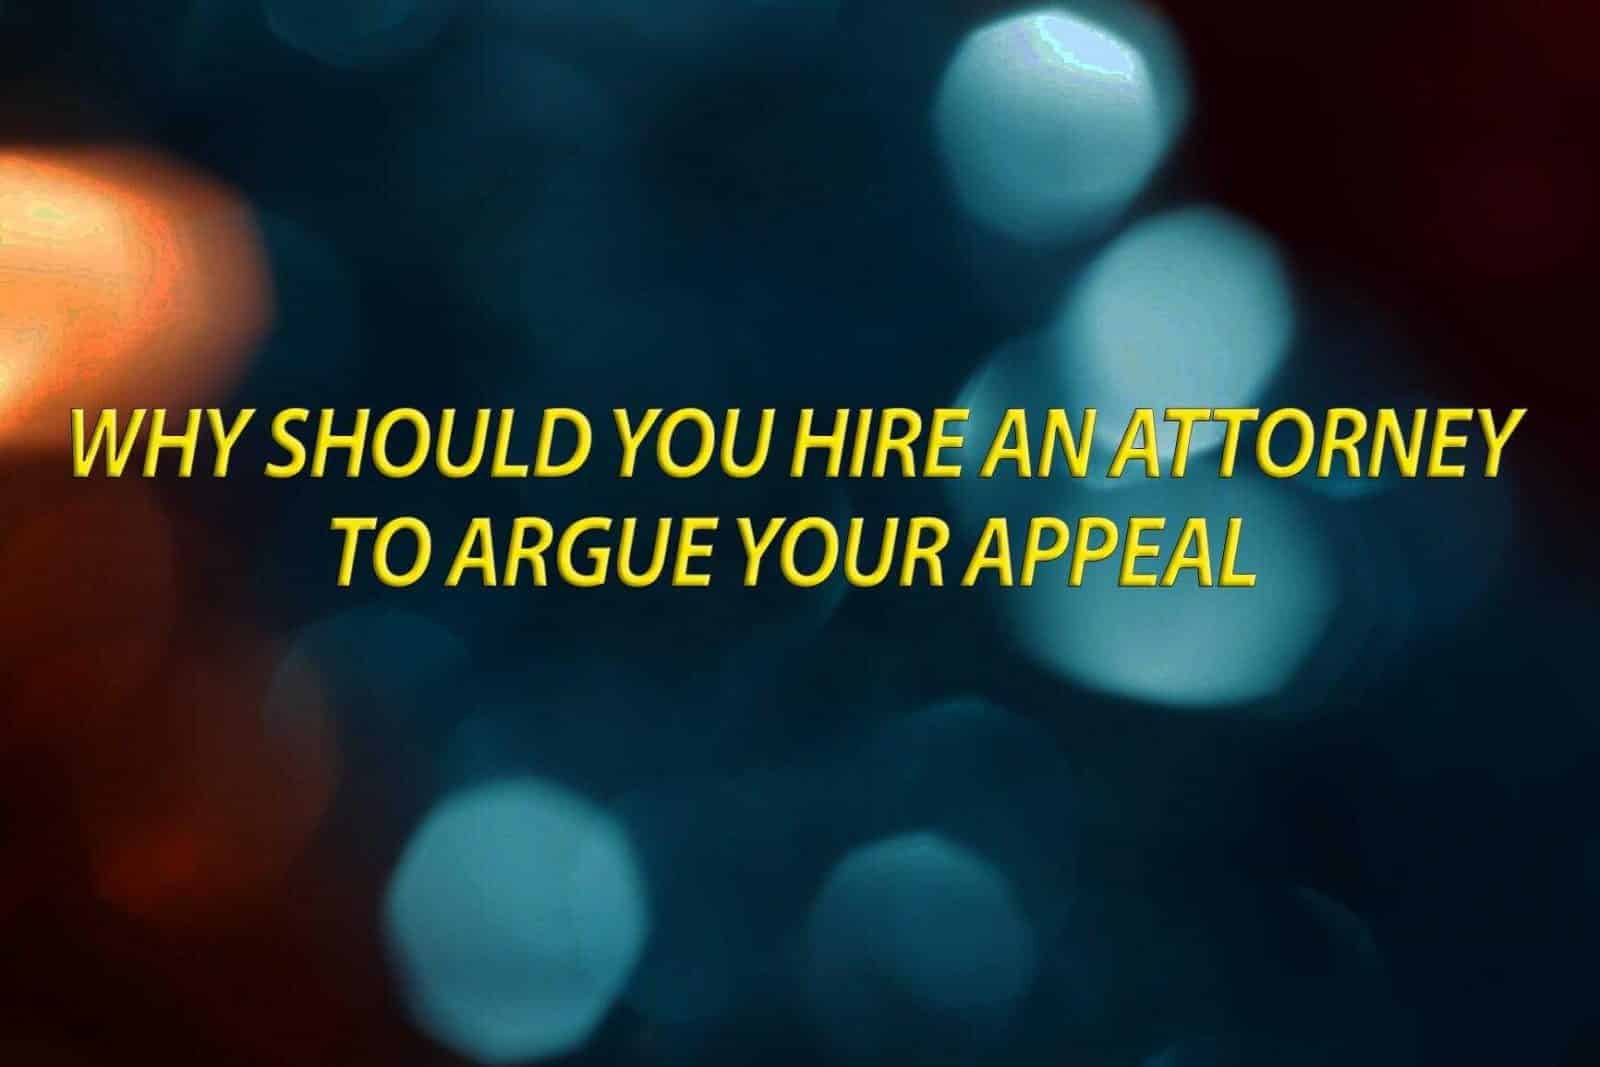 Why should you hire an attorney to argue your appeal